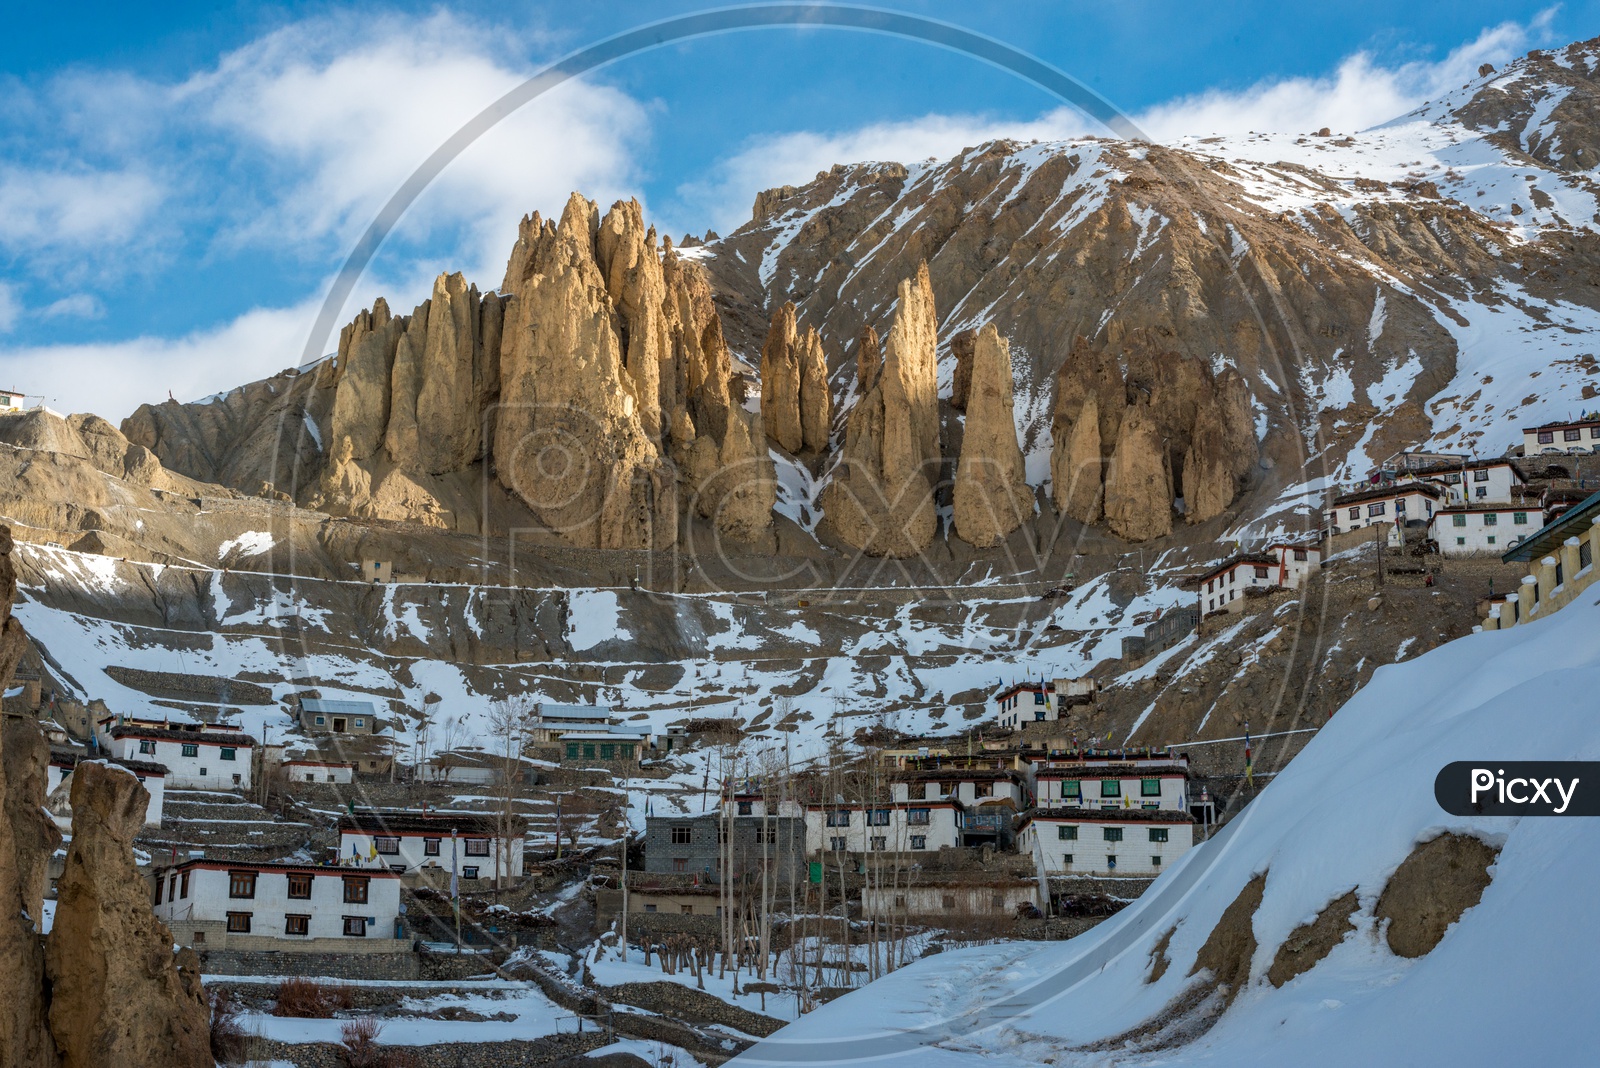 A Village on Mountain Covered in Snow with Rock Mountains in Background